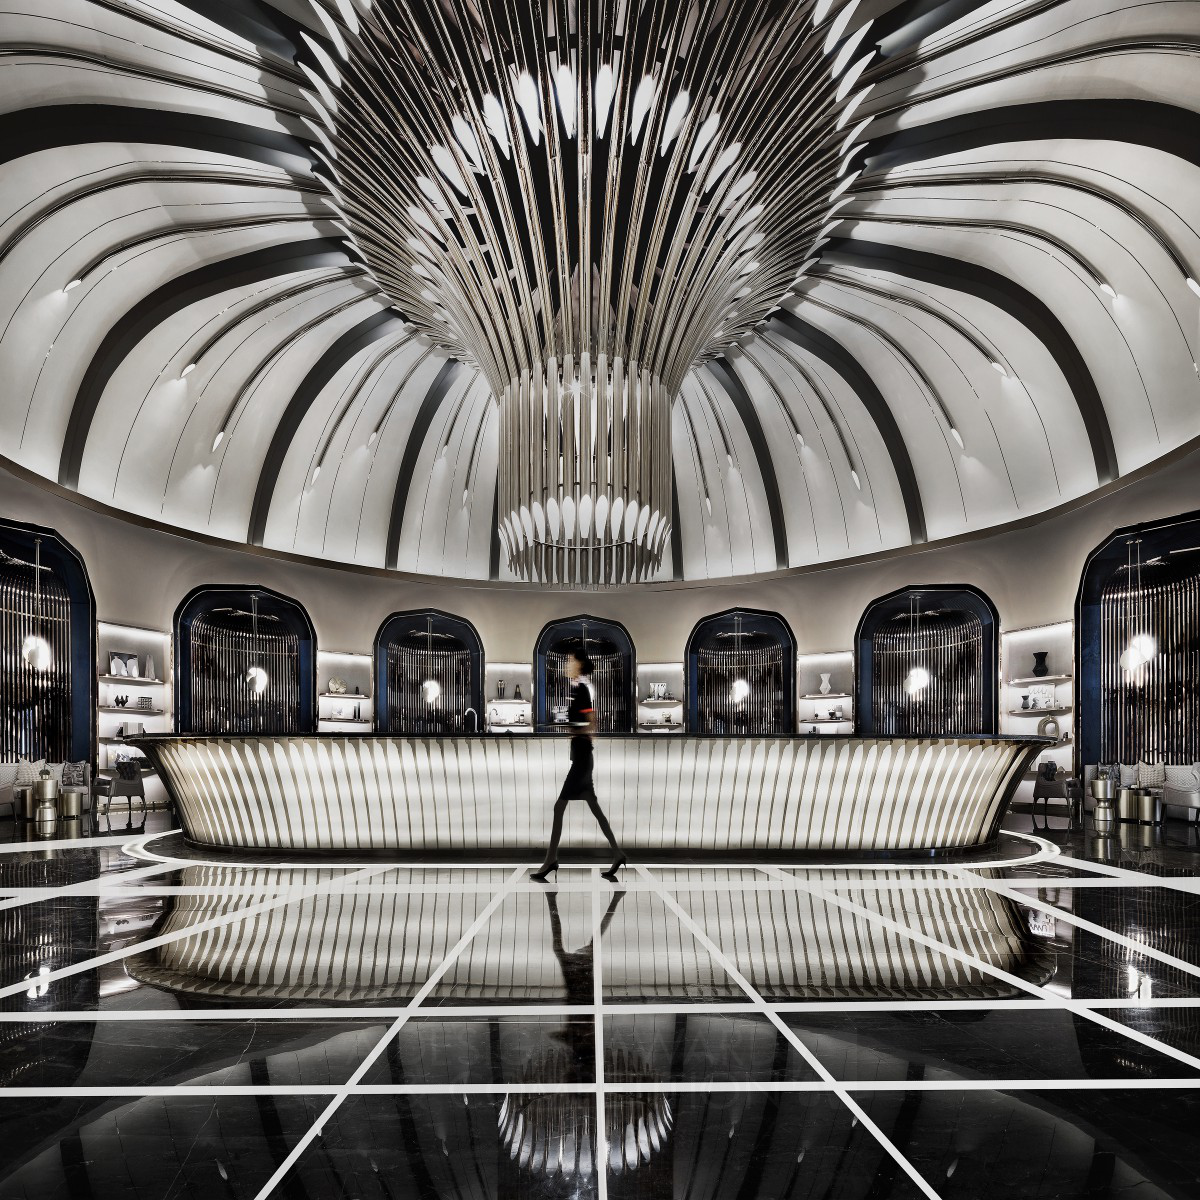 Blossom of Life Sales Center by Mohen Chao Design Assoc. Platinum Interior Space and Exhibition Design Award Winner 2019 